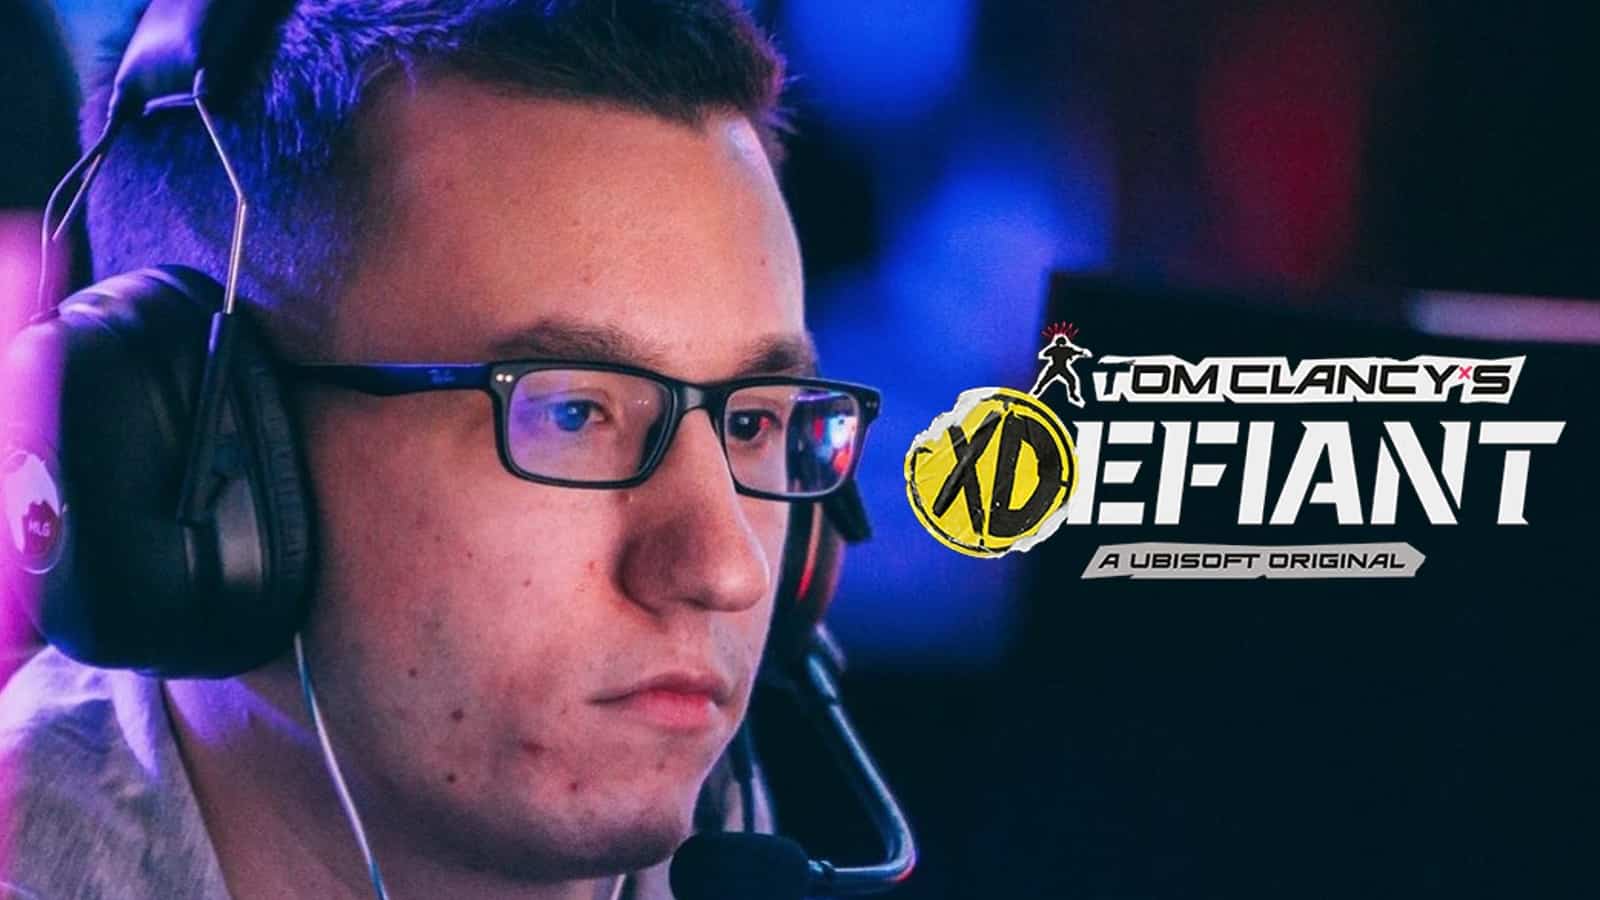 aches playing at MLG LAN with XDefiant logo